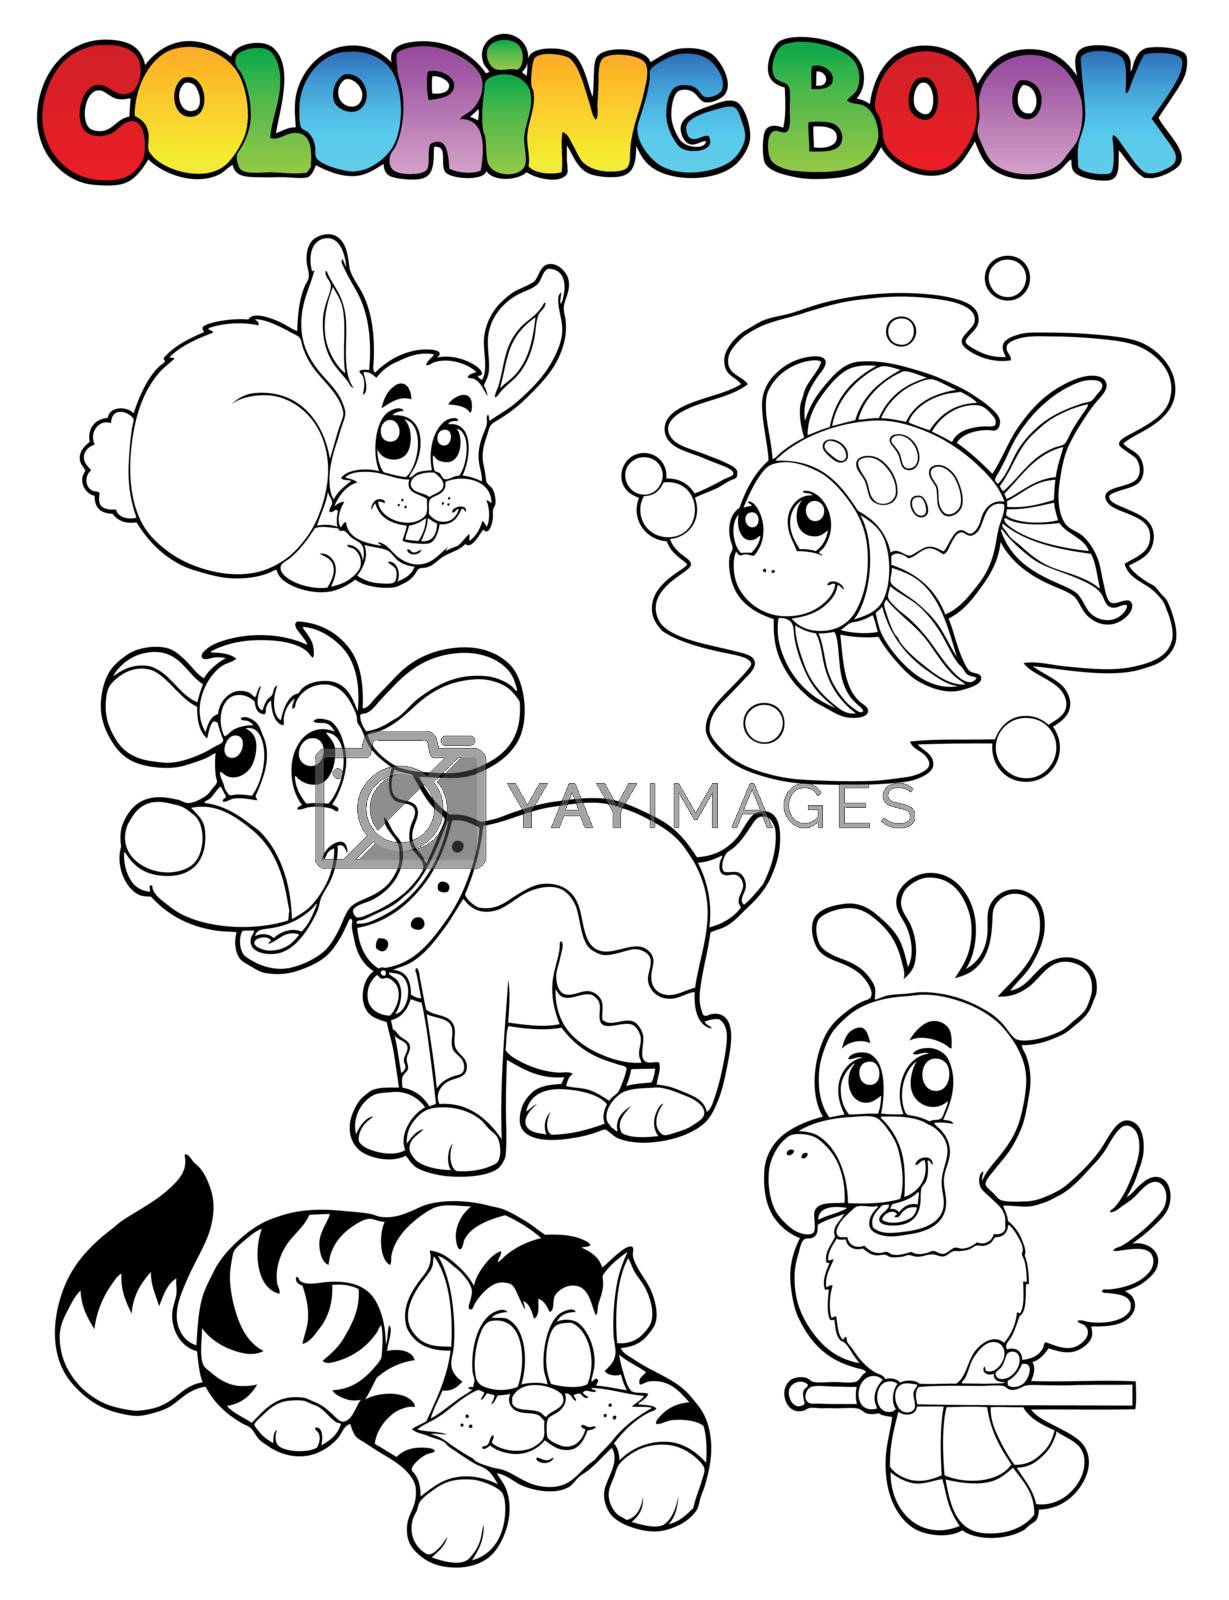 Coloring book with happy pets 1 - vector illustration.